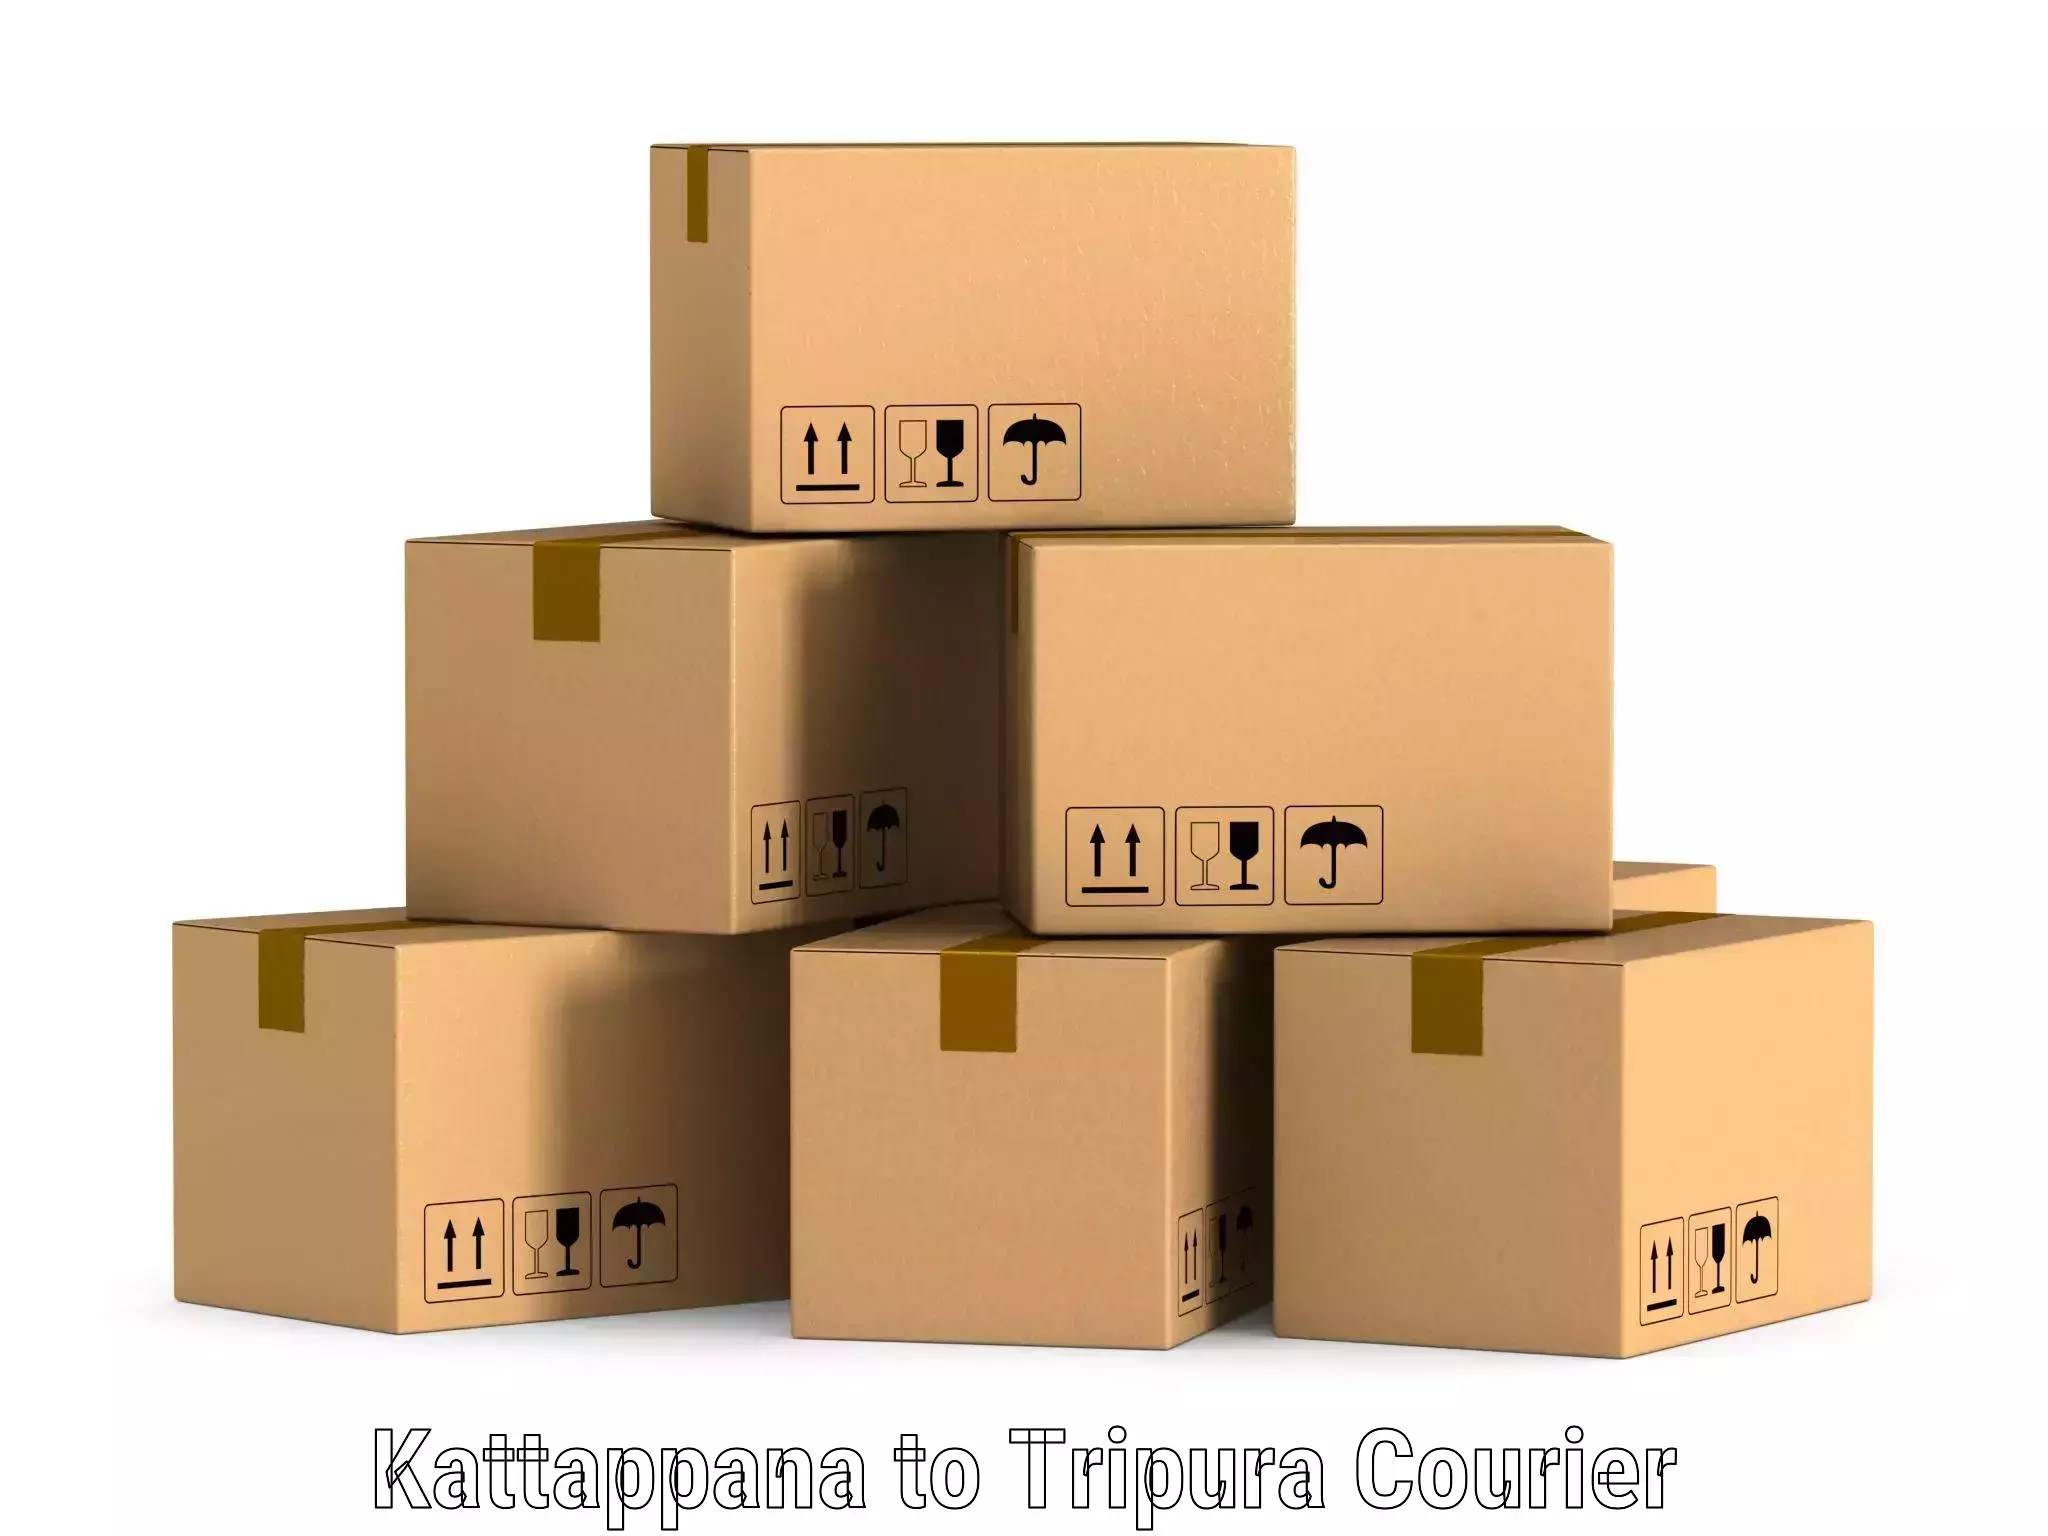 Package delivery network Kattappana to Amarpur